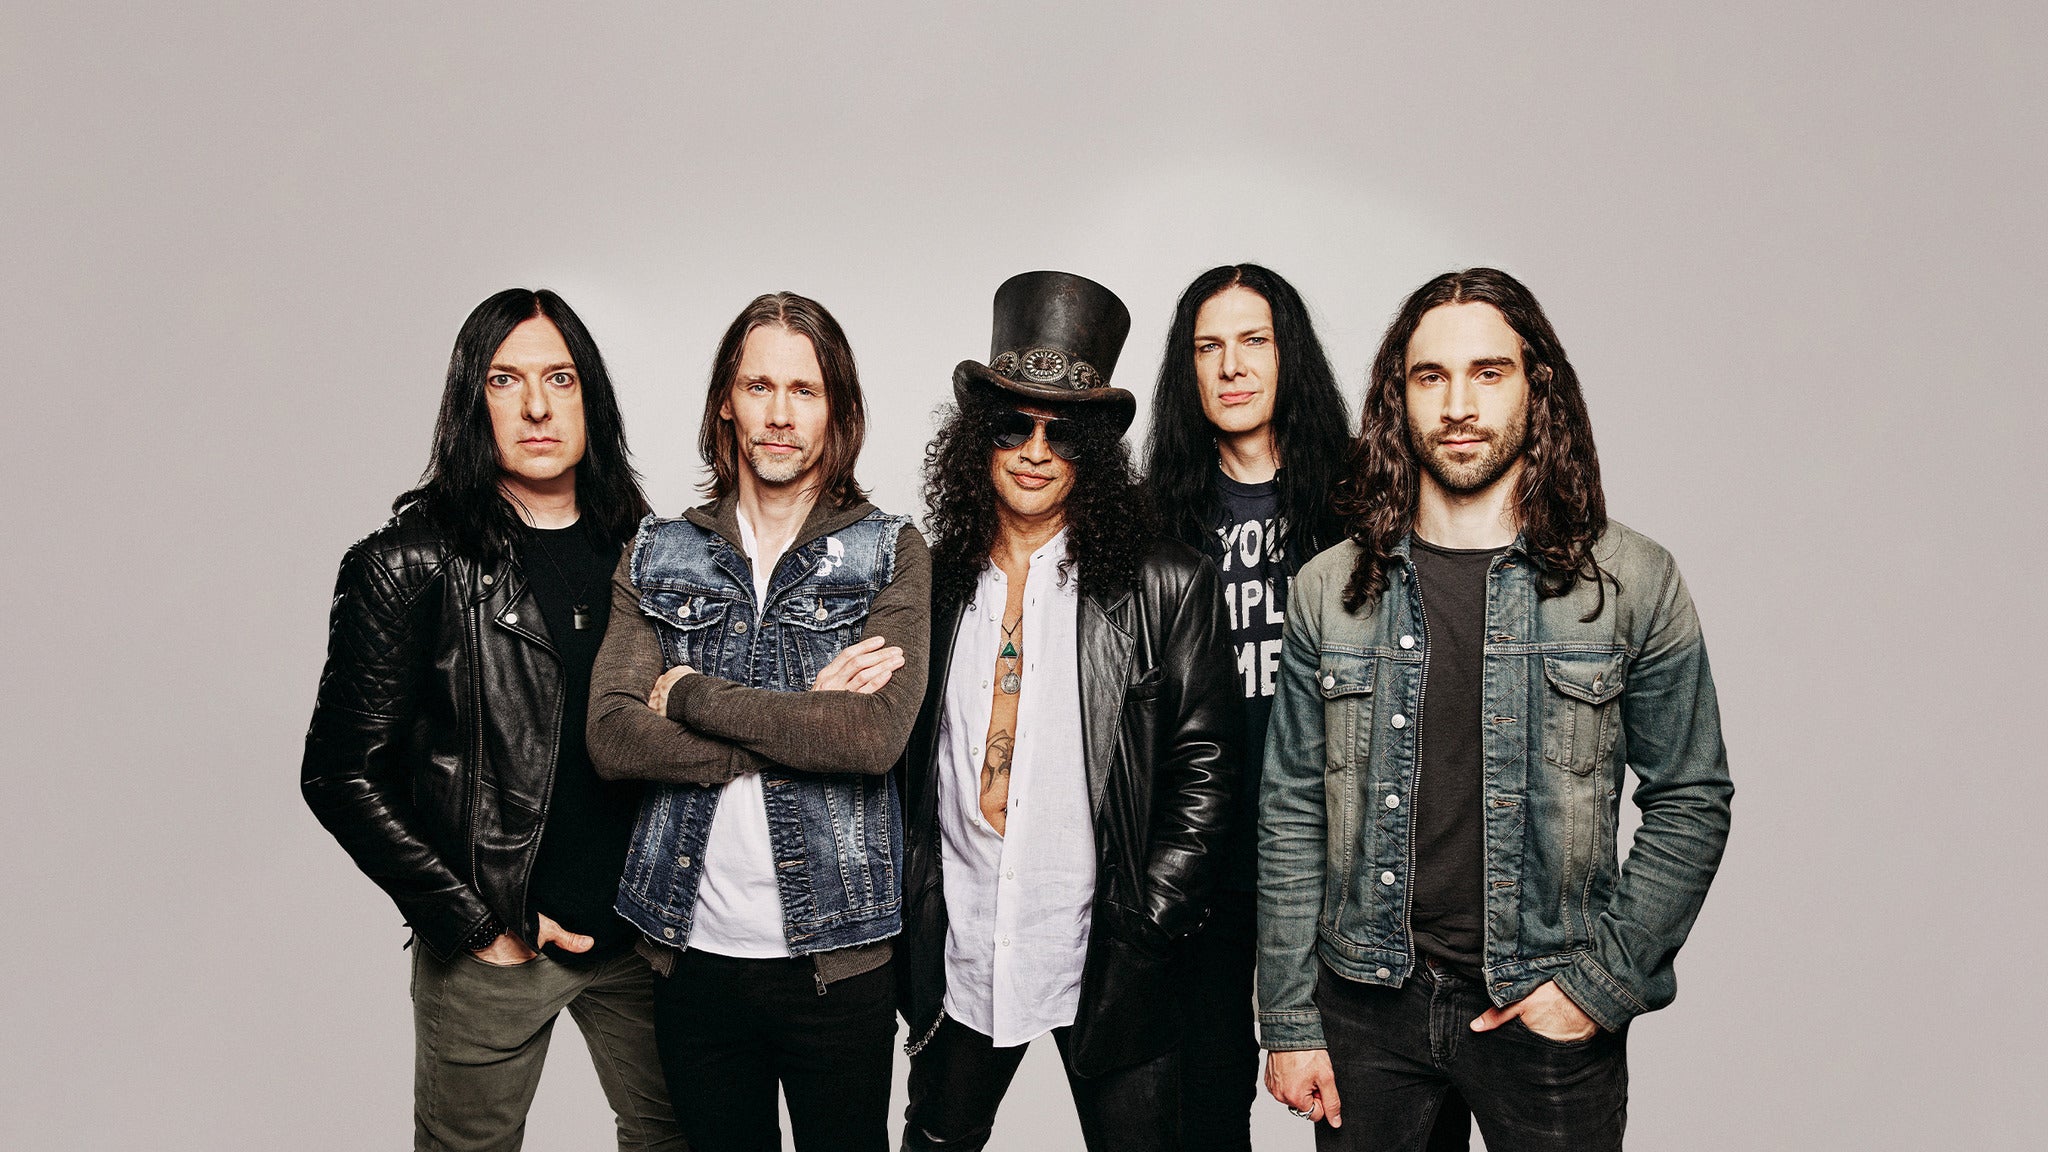 Slash featuring Myles Kennedy and The Conspirators in Boston promo photo for Artist presale offer code